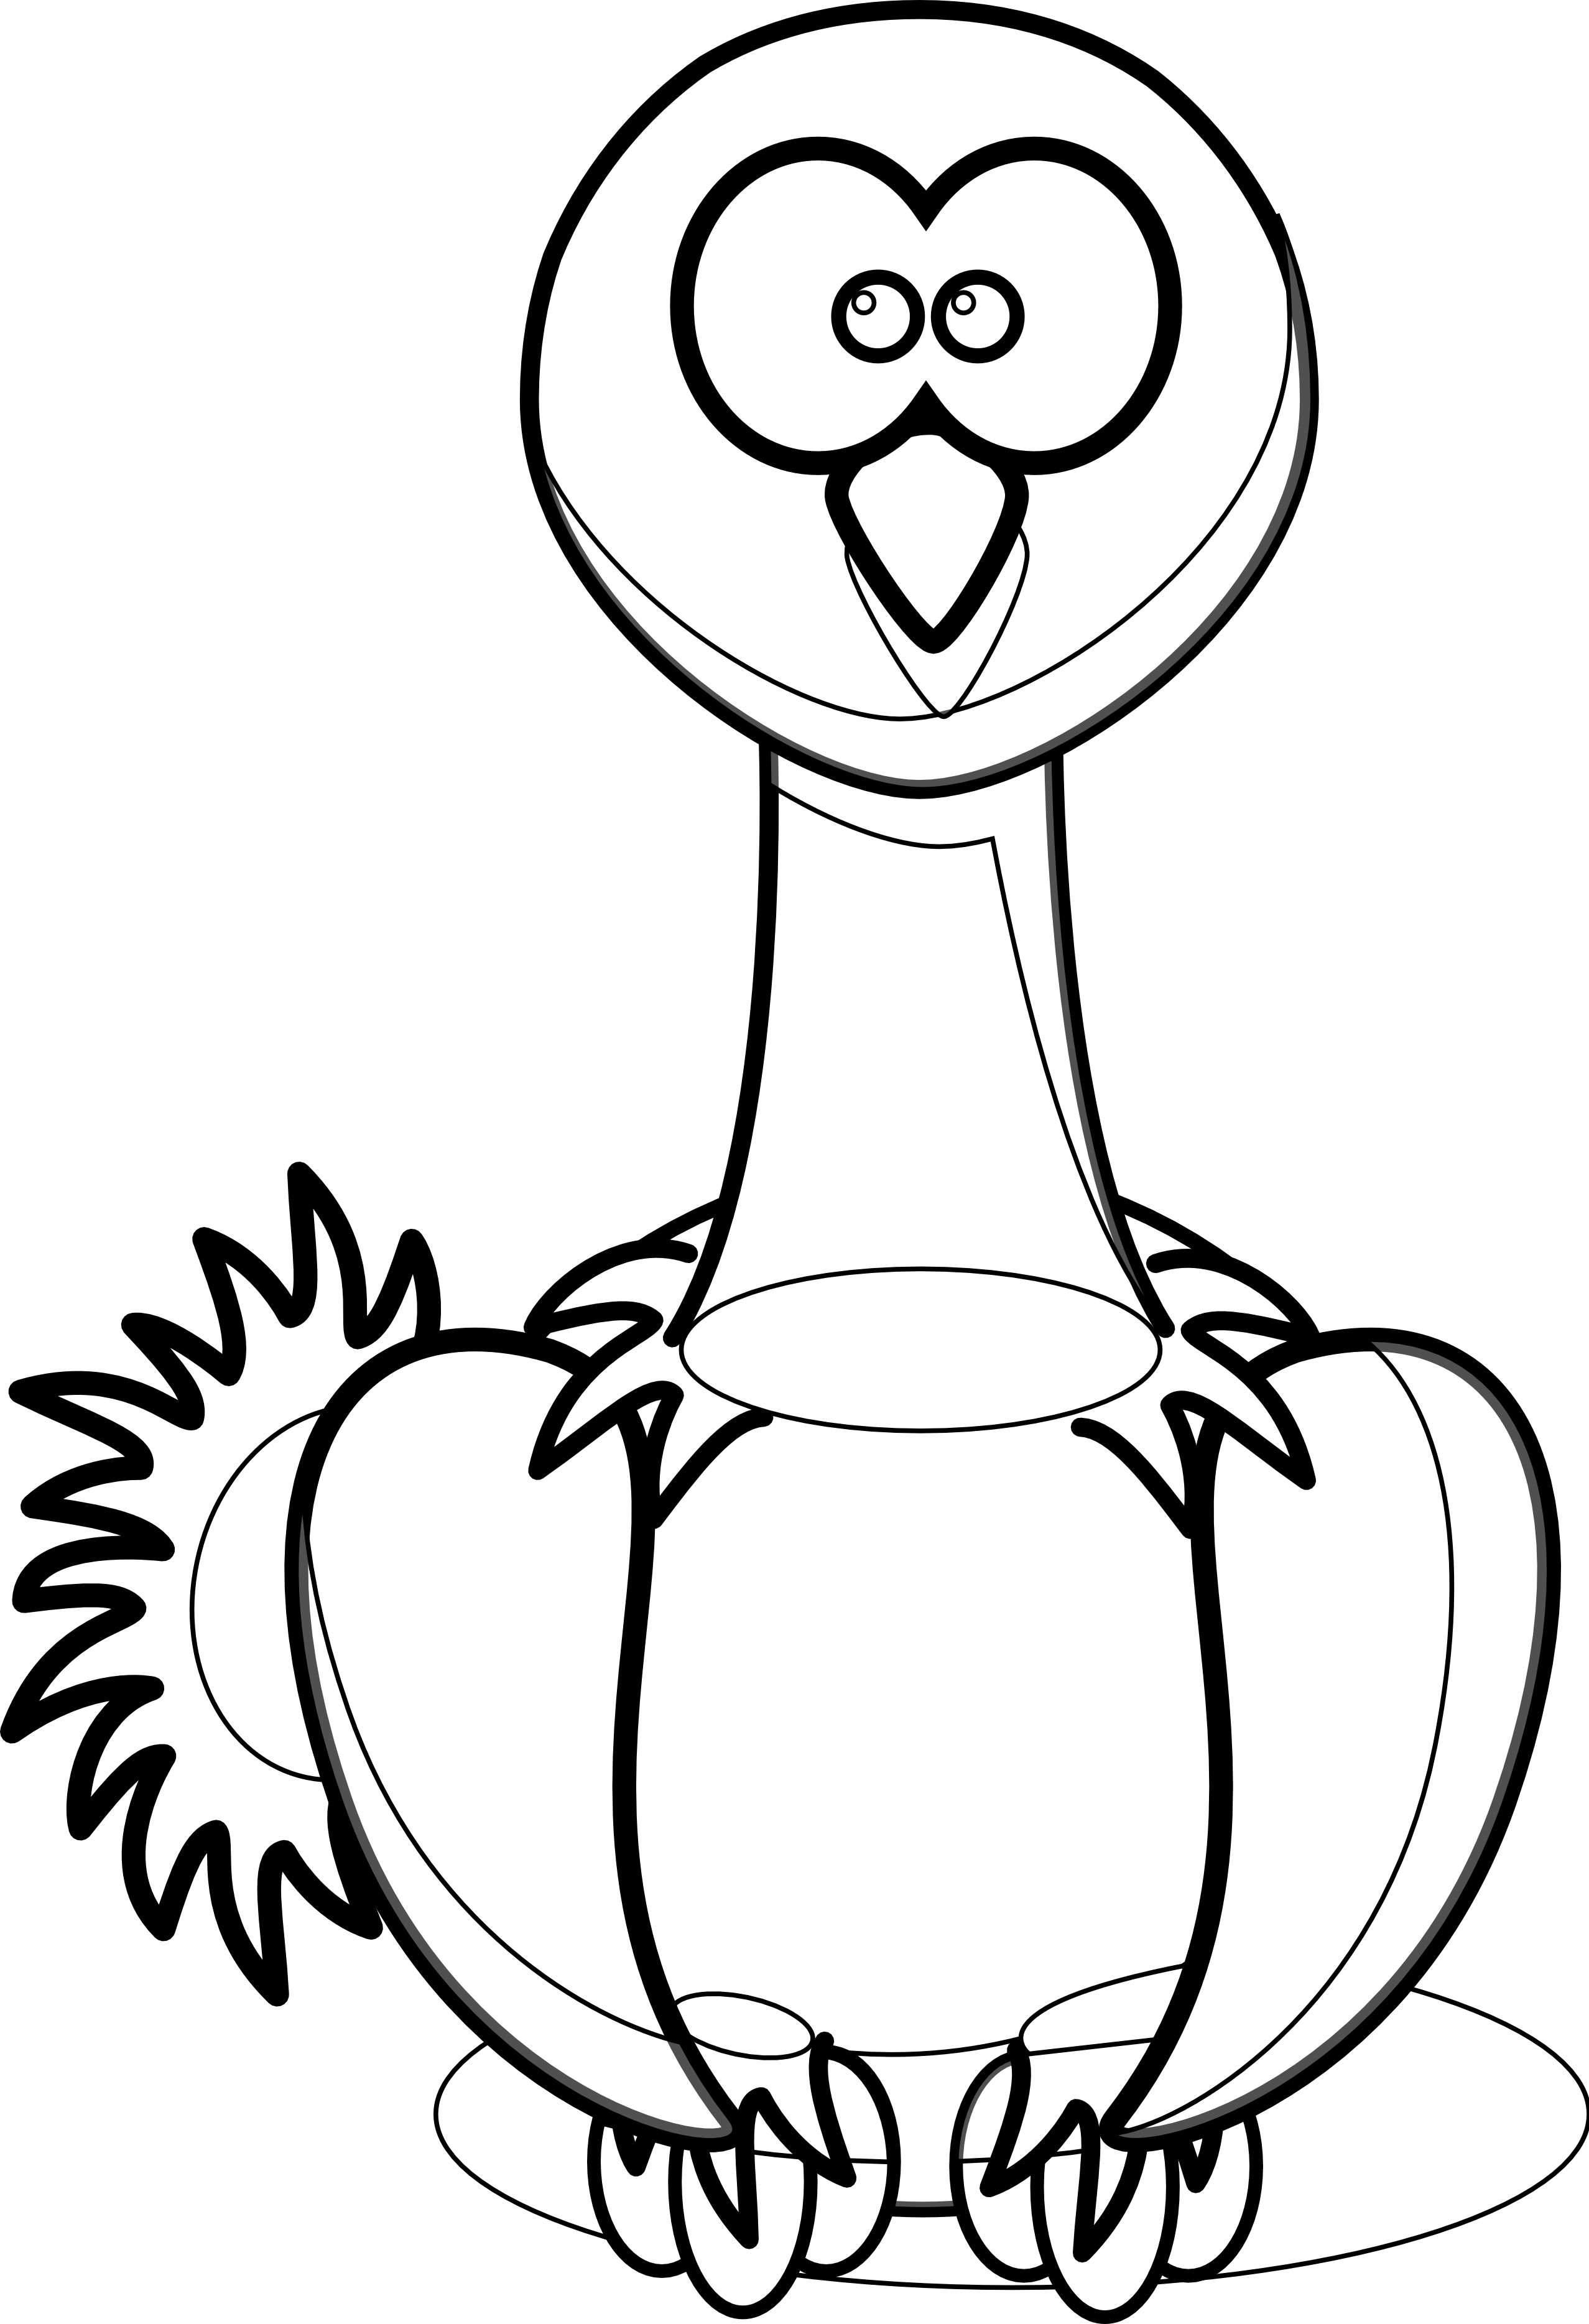 Ostrich coloring panda free. Kangaroo clipart colouring page